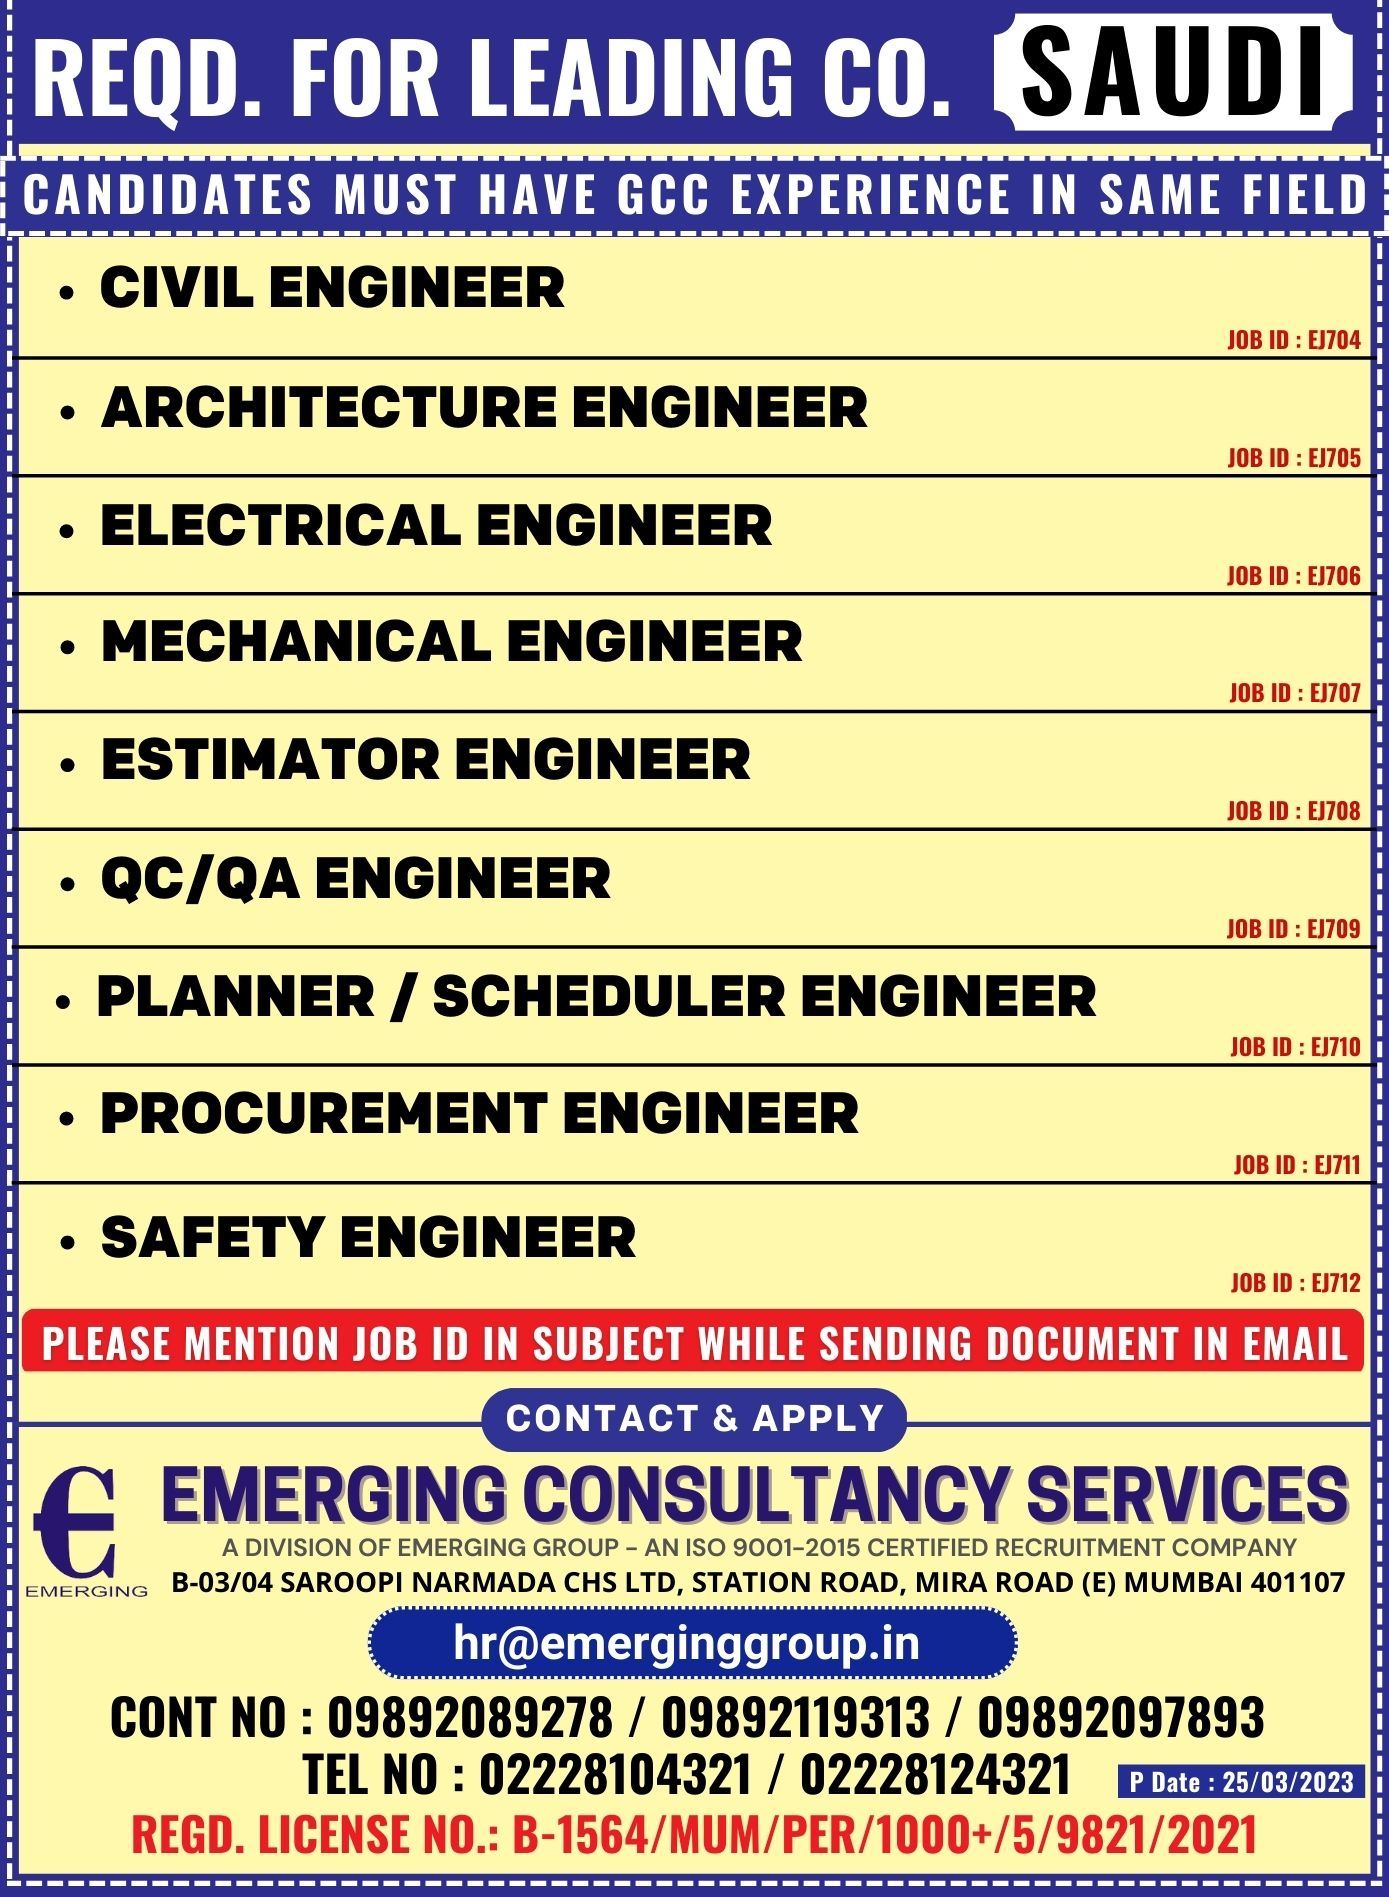 EMERGING CONSULTANCY SERVICES(4)-3bcf93fe